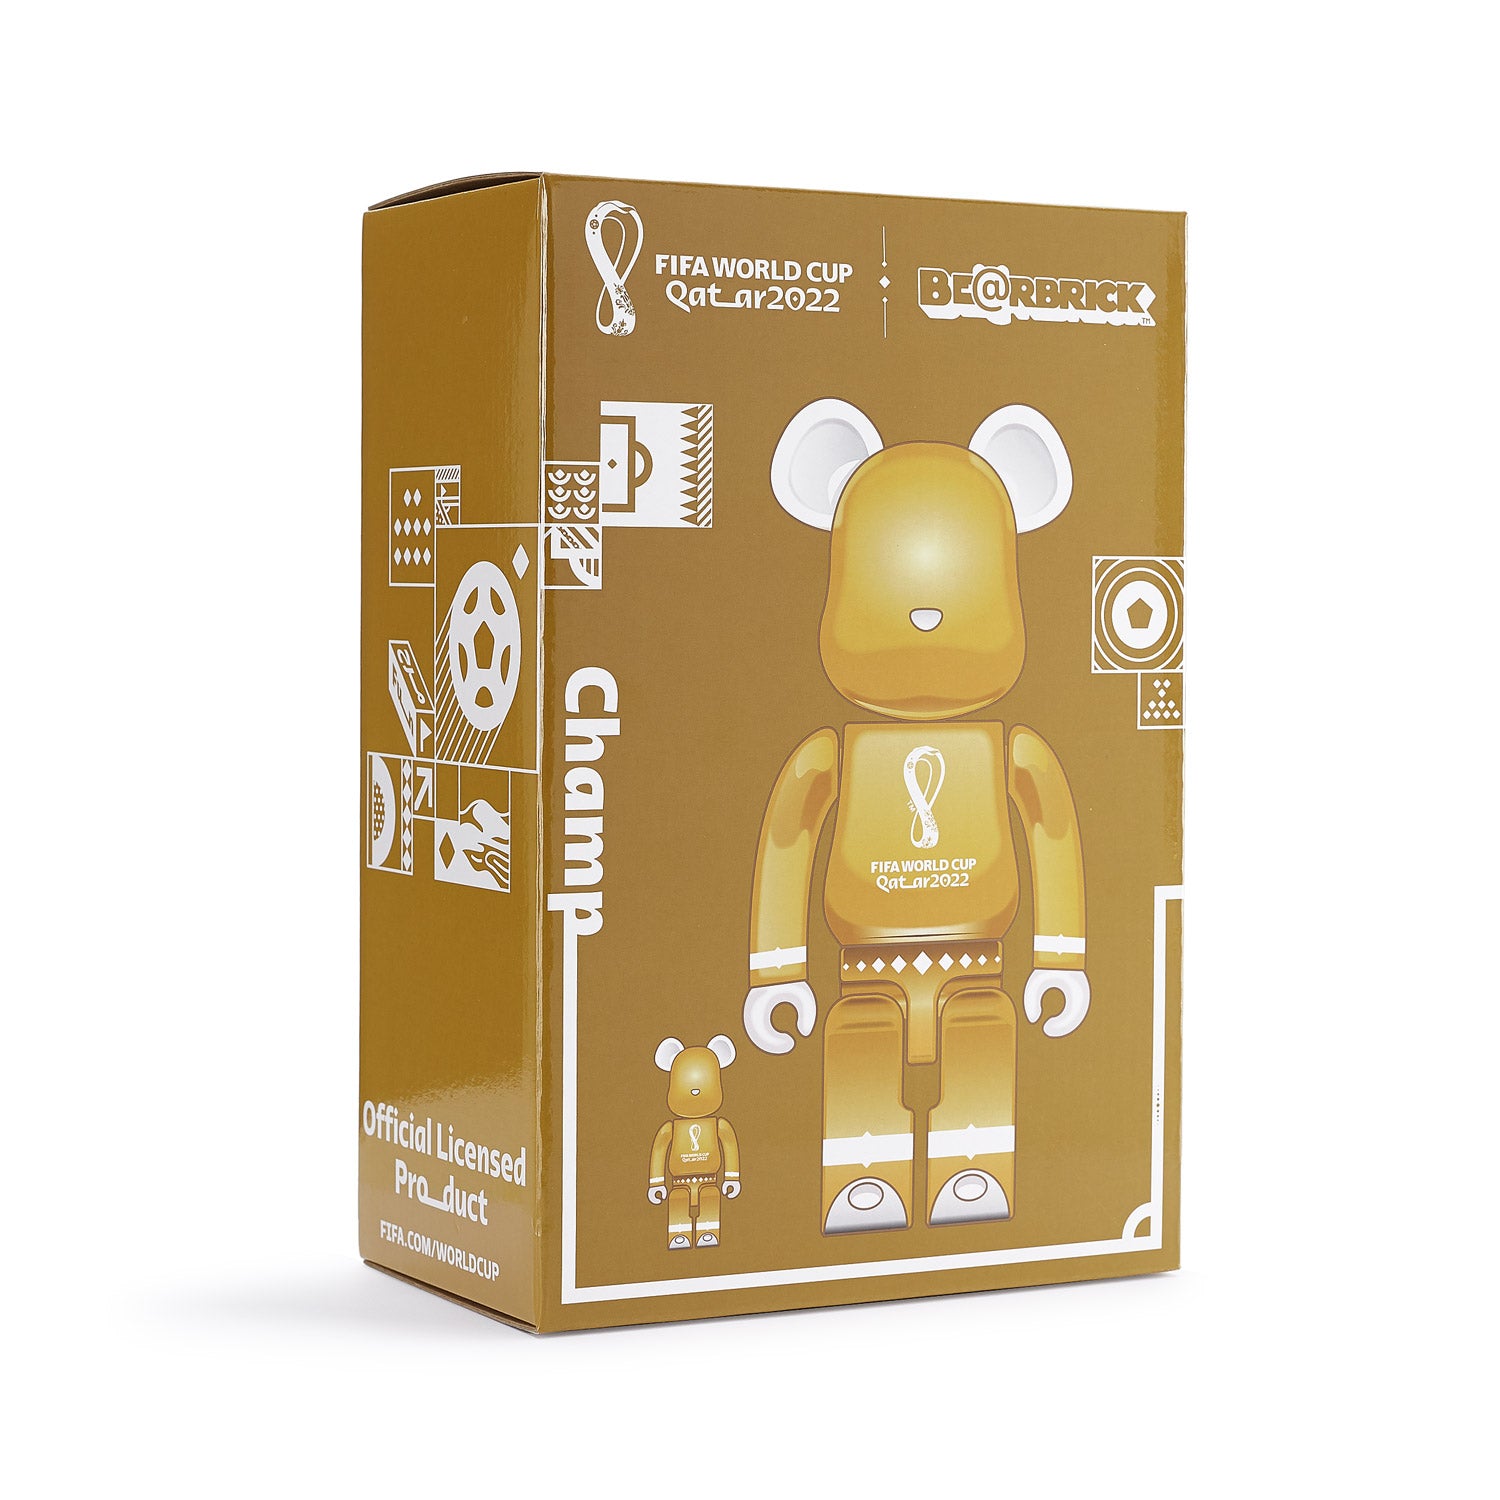 BE＠RBRICK WORLD CUP 2022 WHITECHROME | www.jarussi.com.br